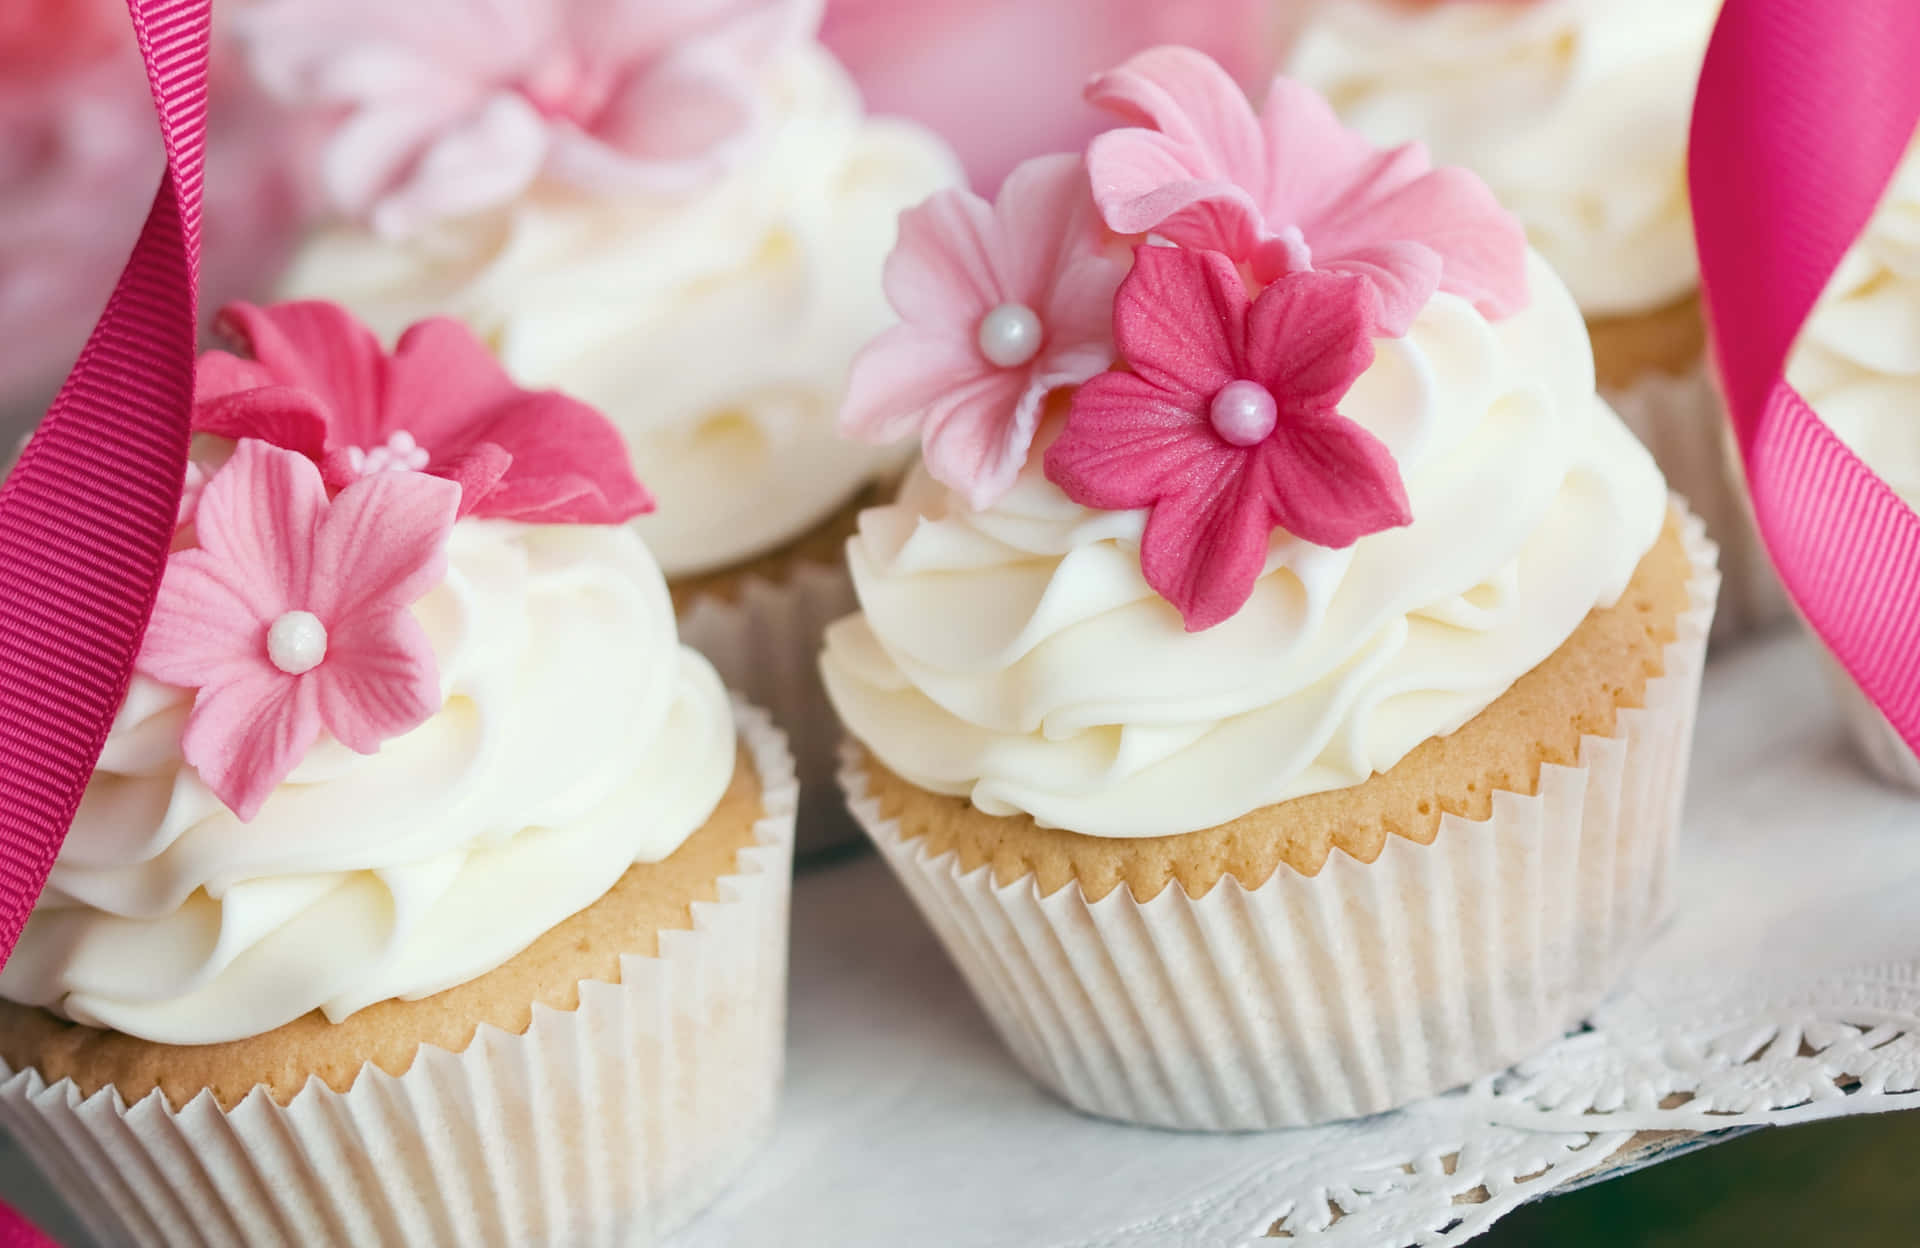 Delicious Pink Cupcakes with Whipped Cream and Cherry on Top Wallpaper